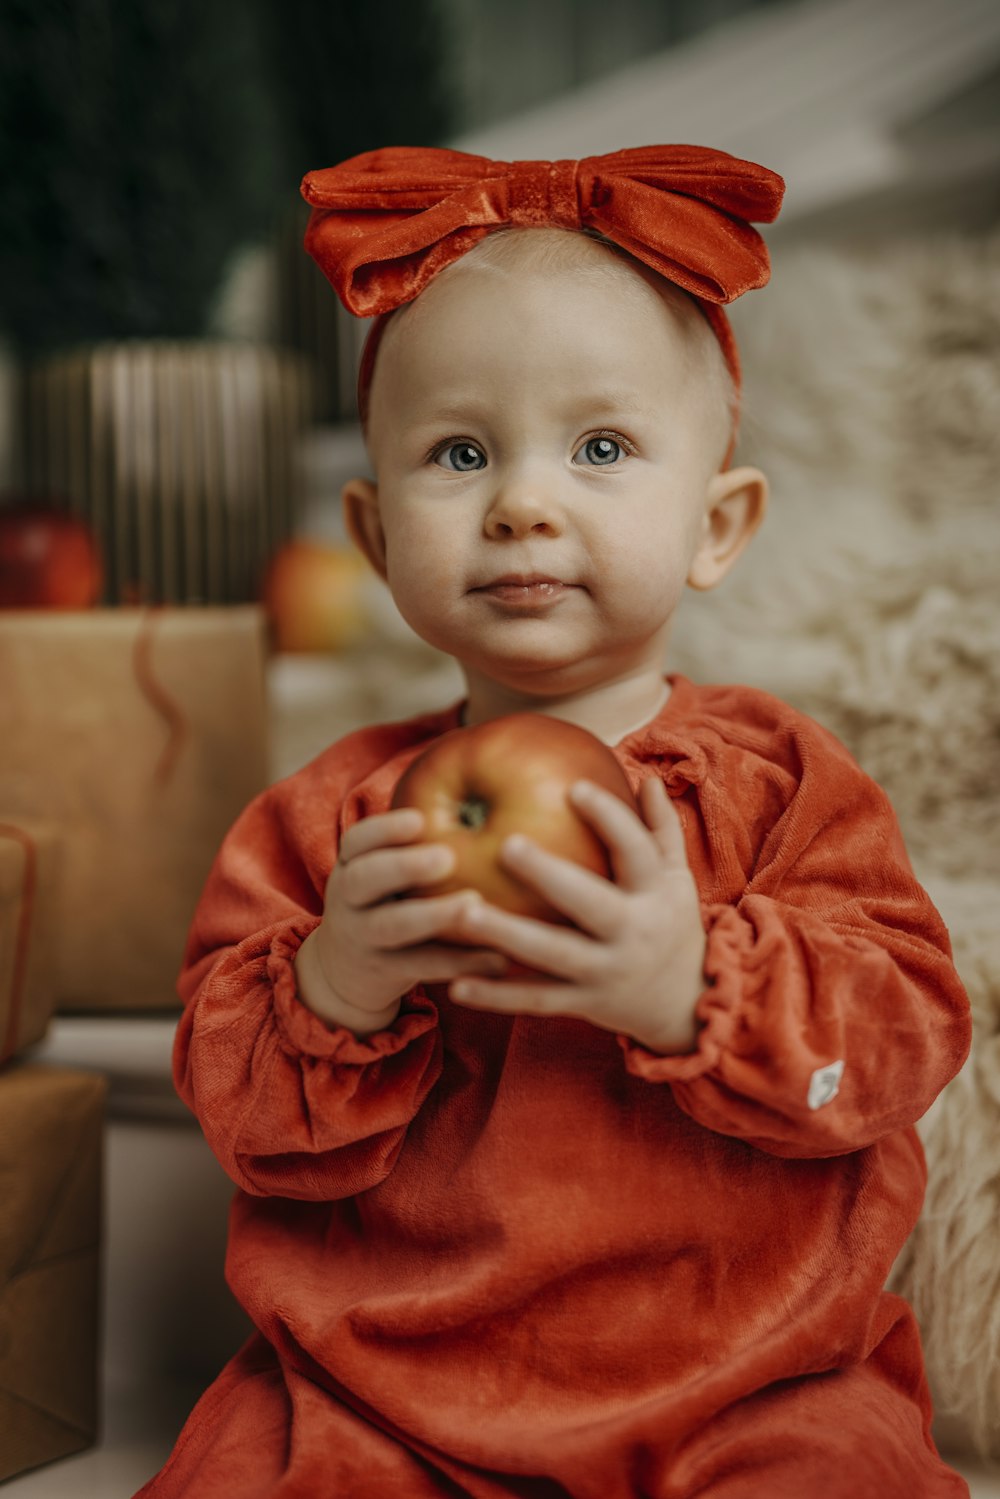 a little girl in a red dress holding an apple